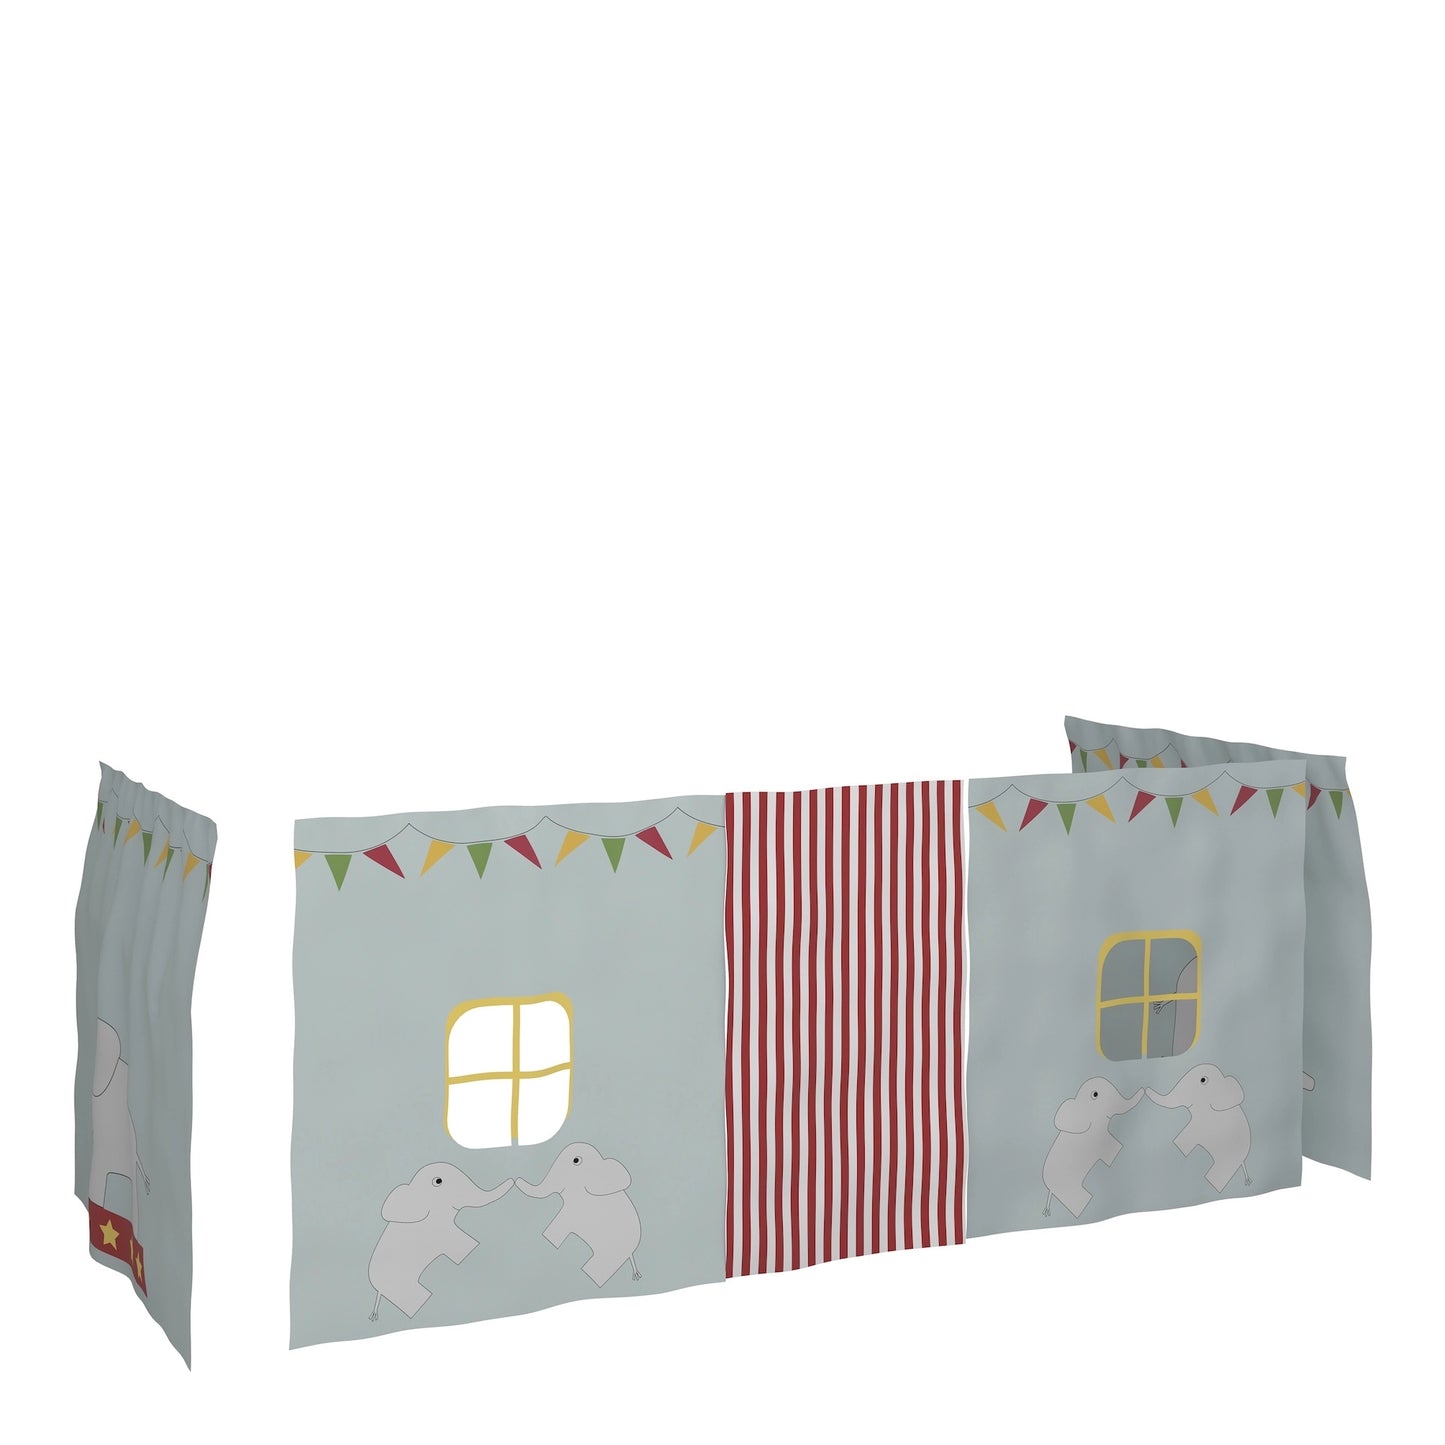 Furniture To Go Steens For Kids Circus Tent